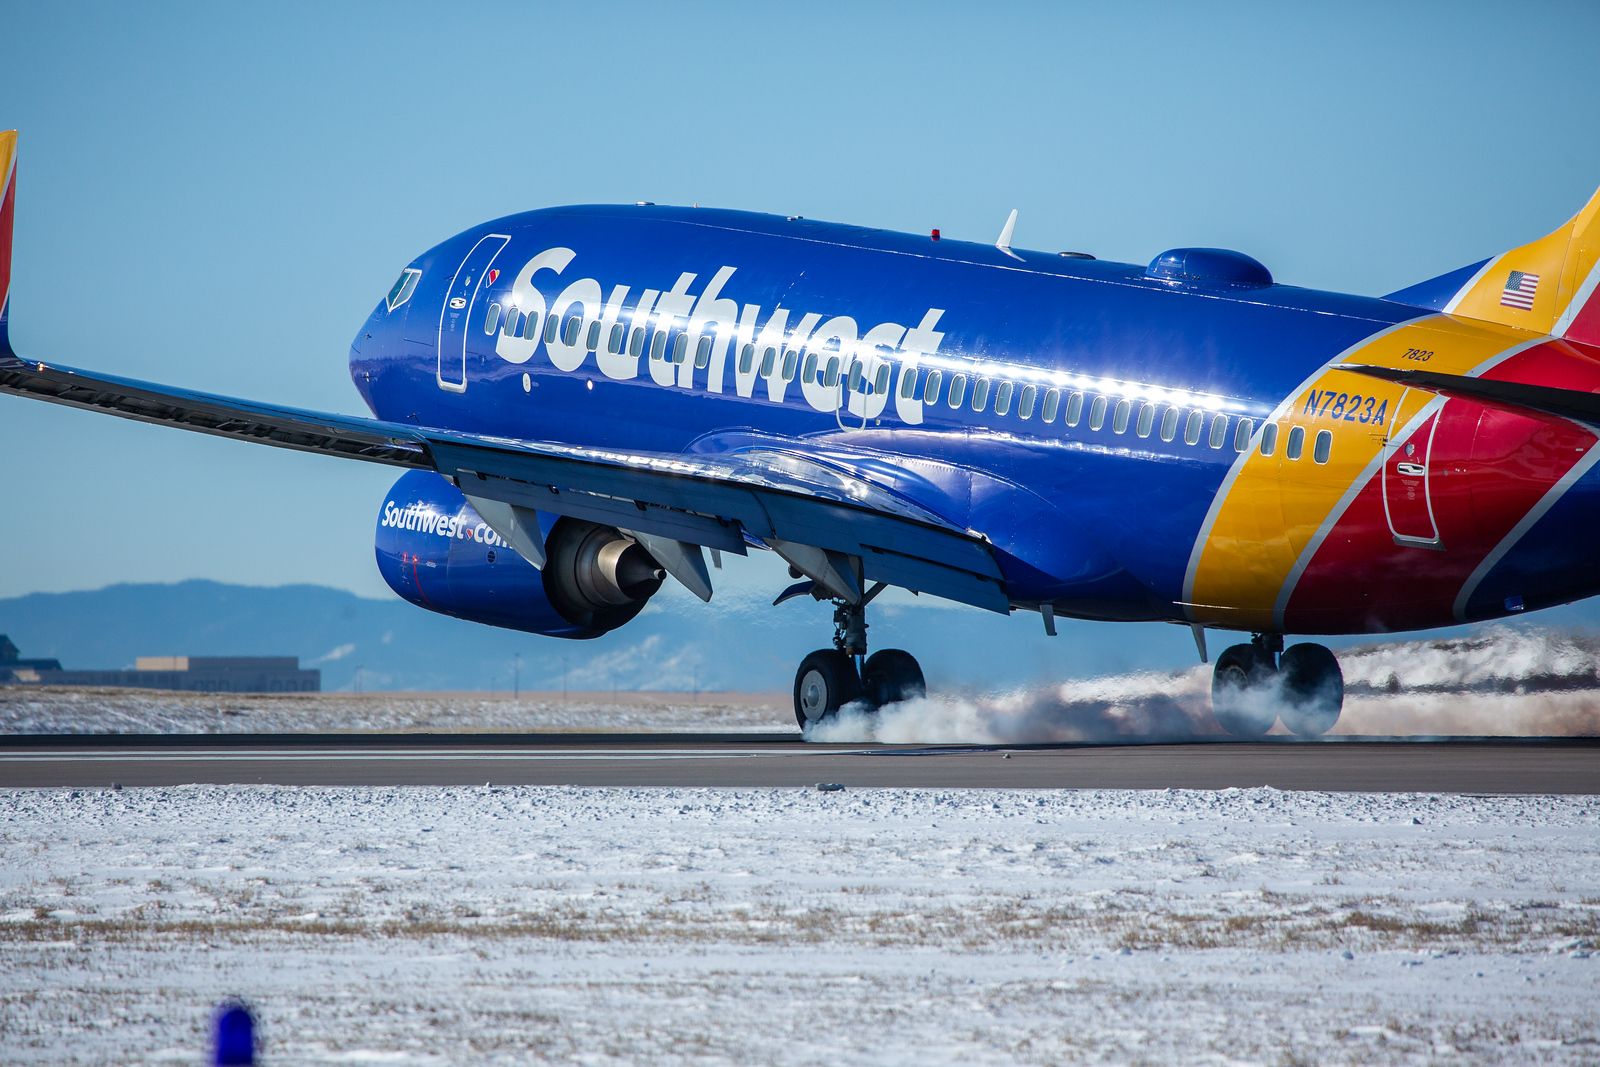 Southwest Airlines Boeing 737-700 (N7823A) at Denver International Airport